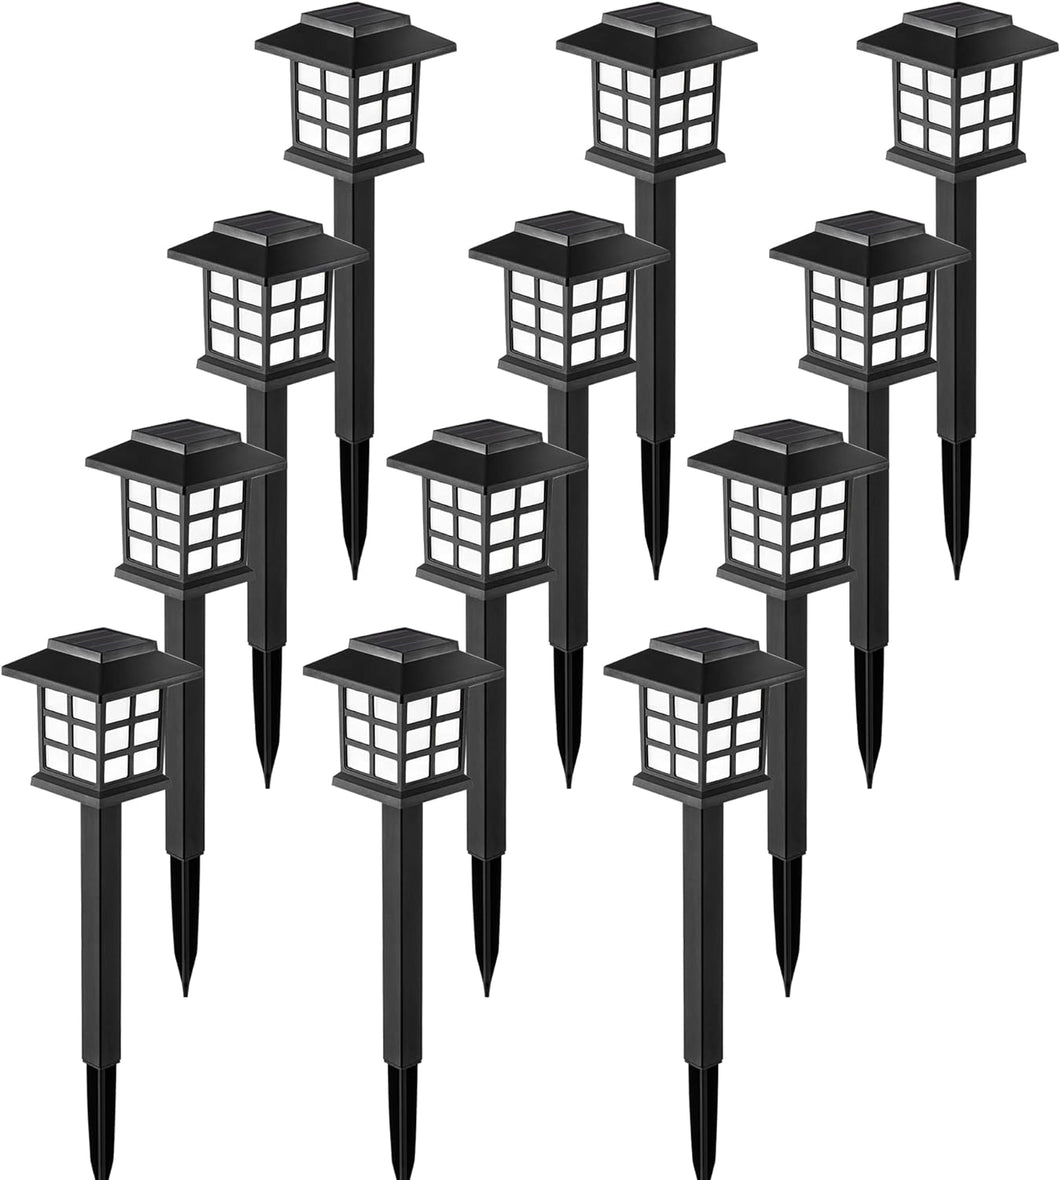 Solar Outdoor Lights,12 Pack LED Solar Lights Outdoor Waterproof, Solar Walkway Lights Maintain 10 Hours of Lighting for Your Garden, Landscape, Path, Yard, Patio, Driveway